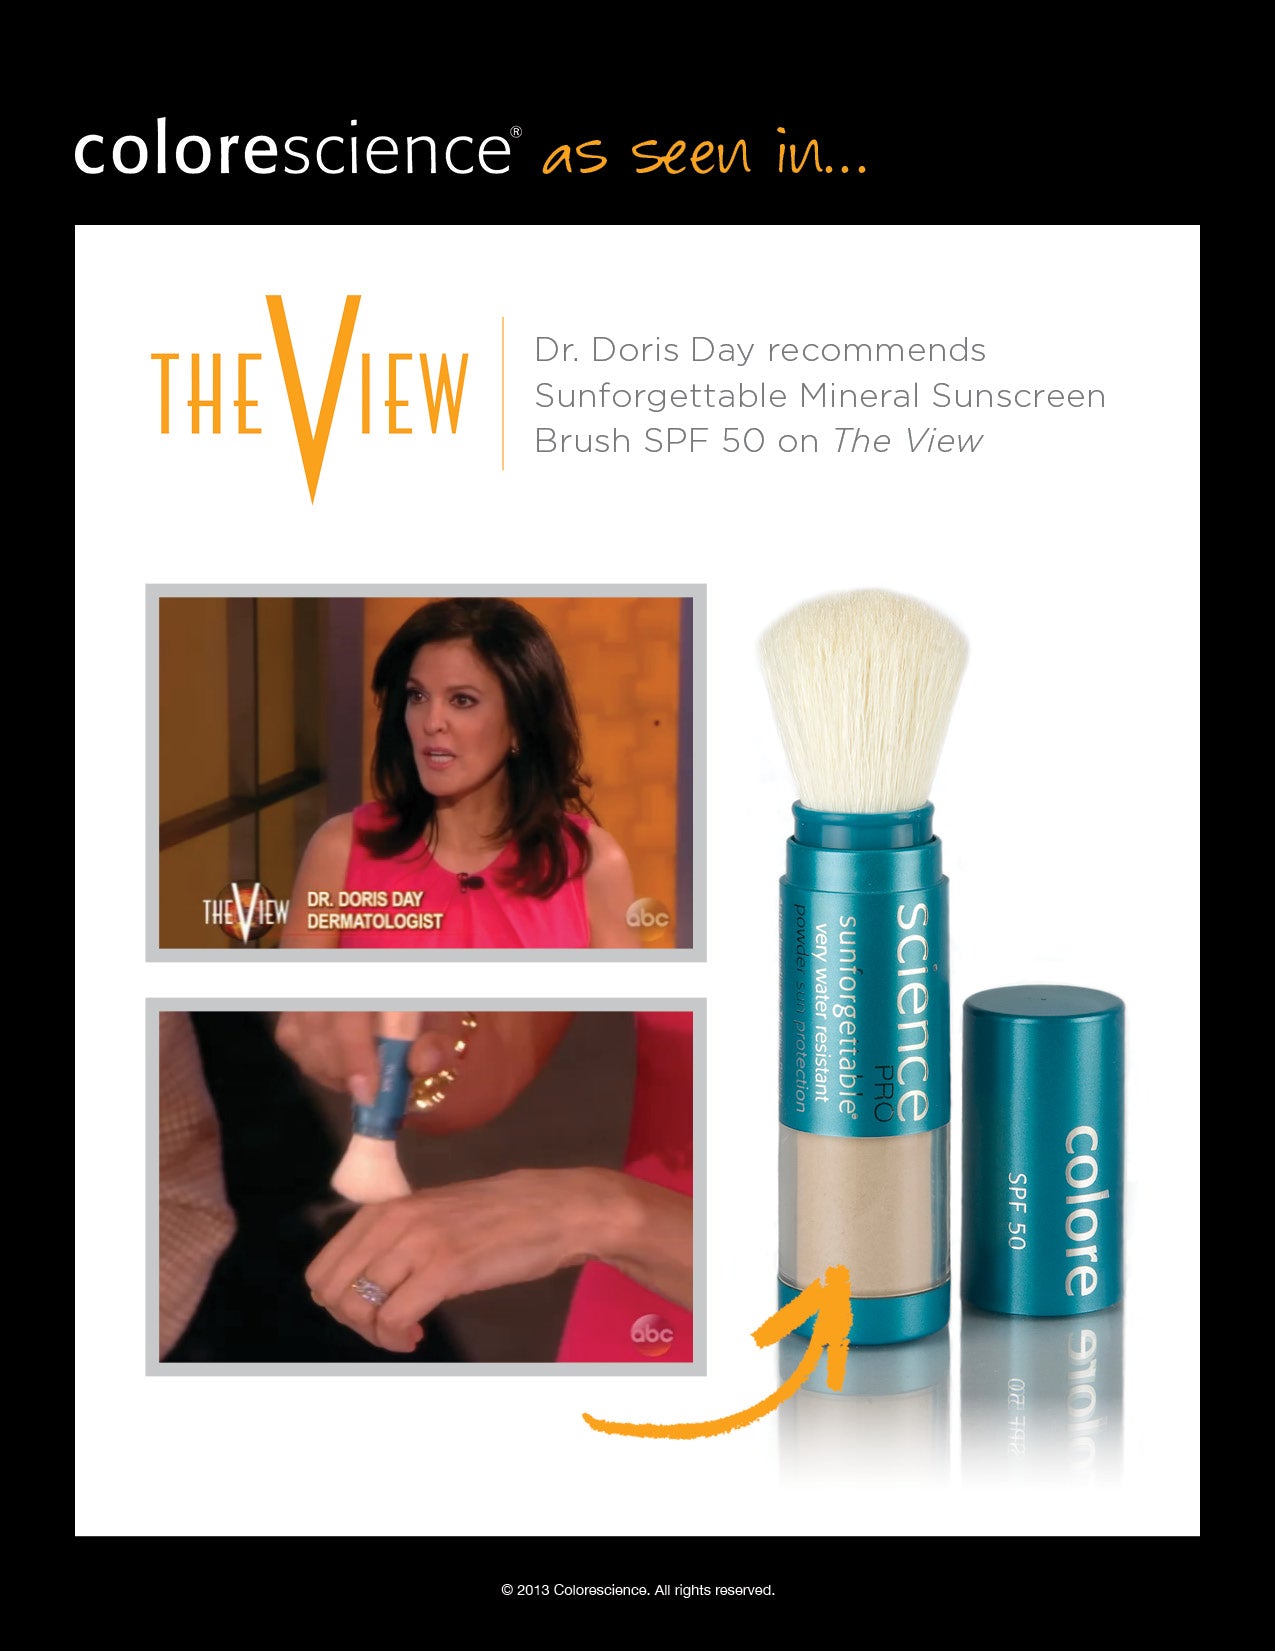 Dermatologist Dr. Doris Day on The View